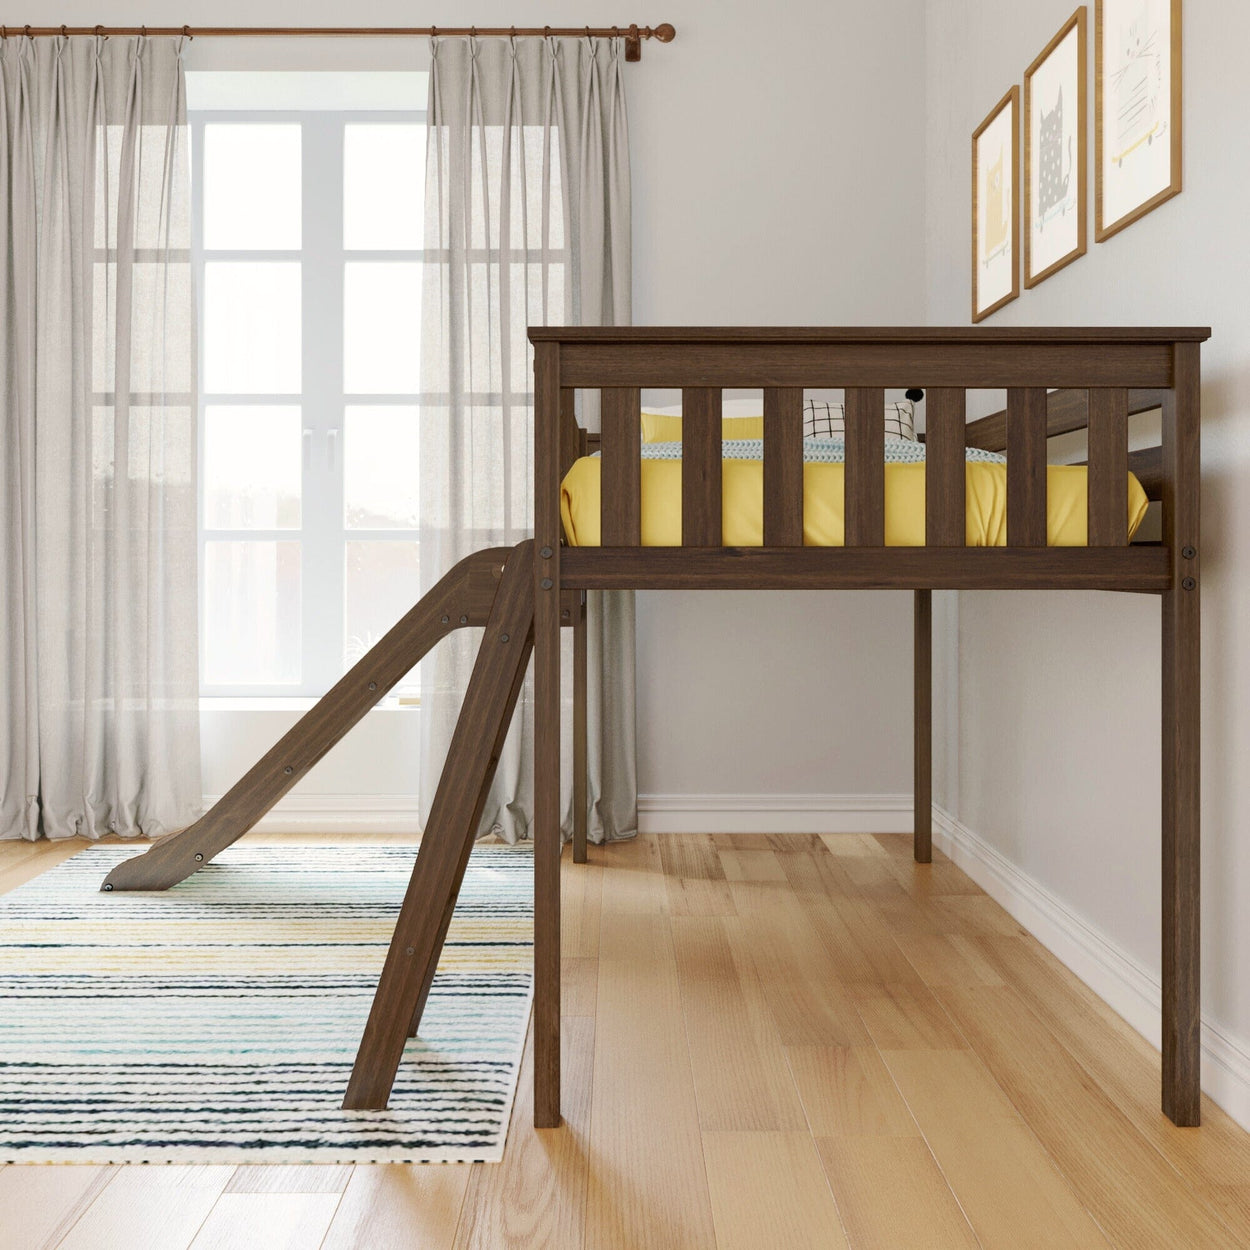 180413-008 : Loft Beds Max & Lily Twin Size Low Loft Bed with Slide and Ladder, Classic Solid Wood Kids Bedroom Furniture, 400 lbs Weight Capacity, 14" Safety Guardrail, Anti-Slip Steps, Walnut